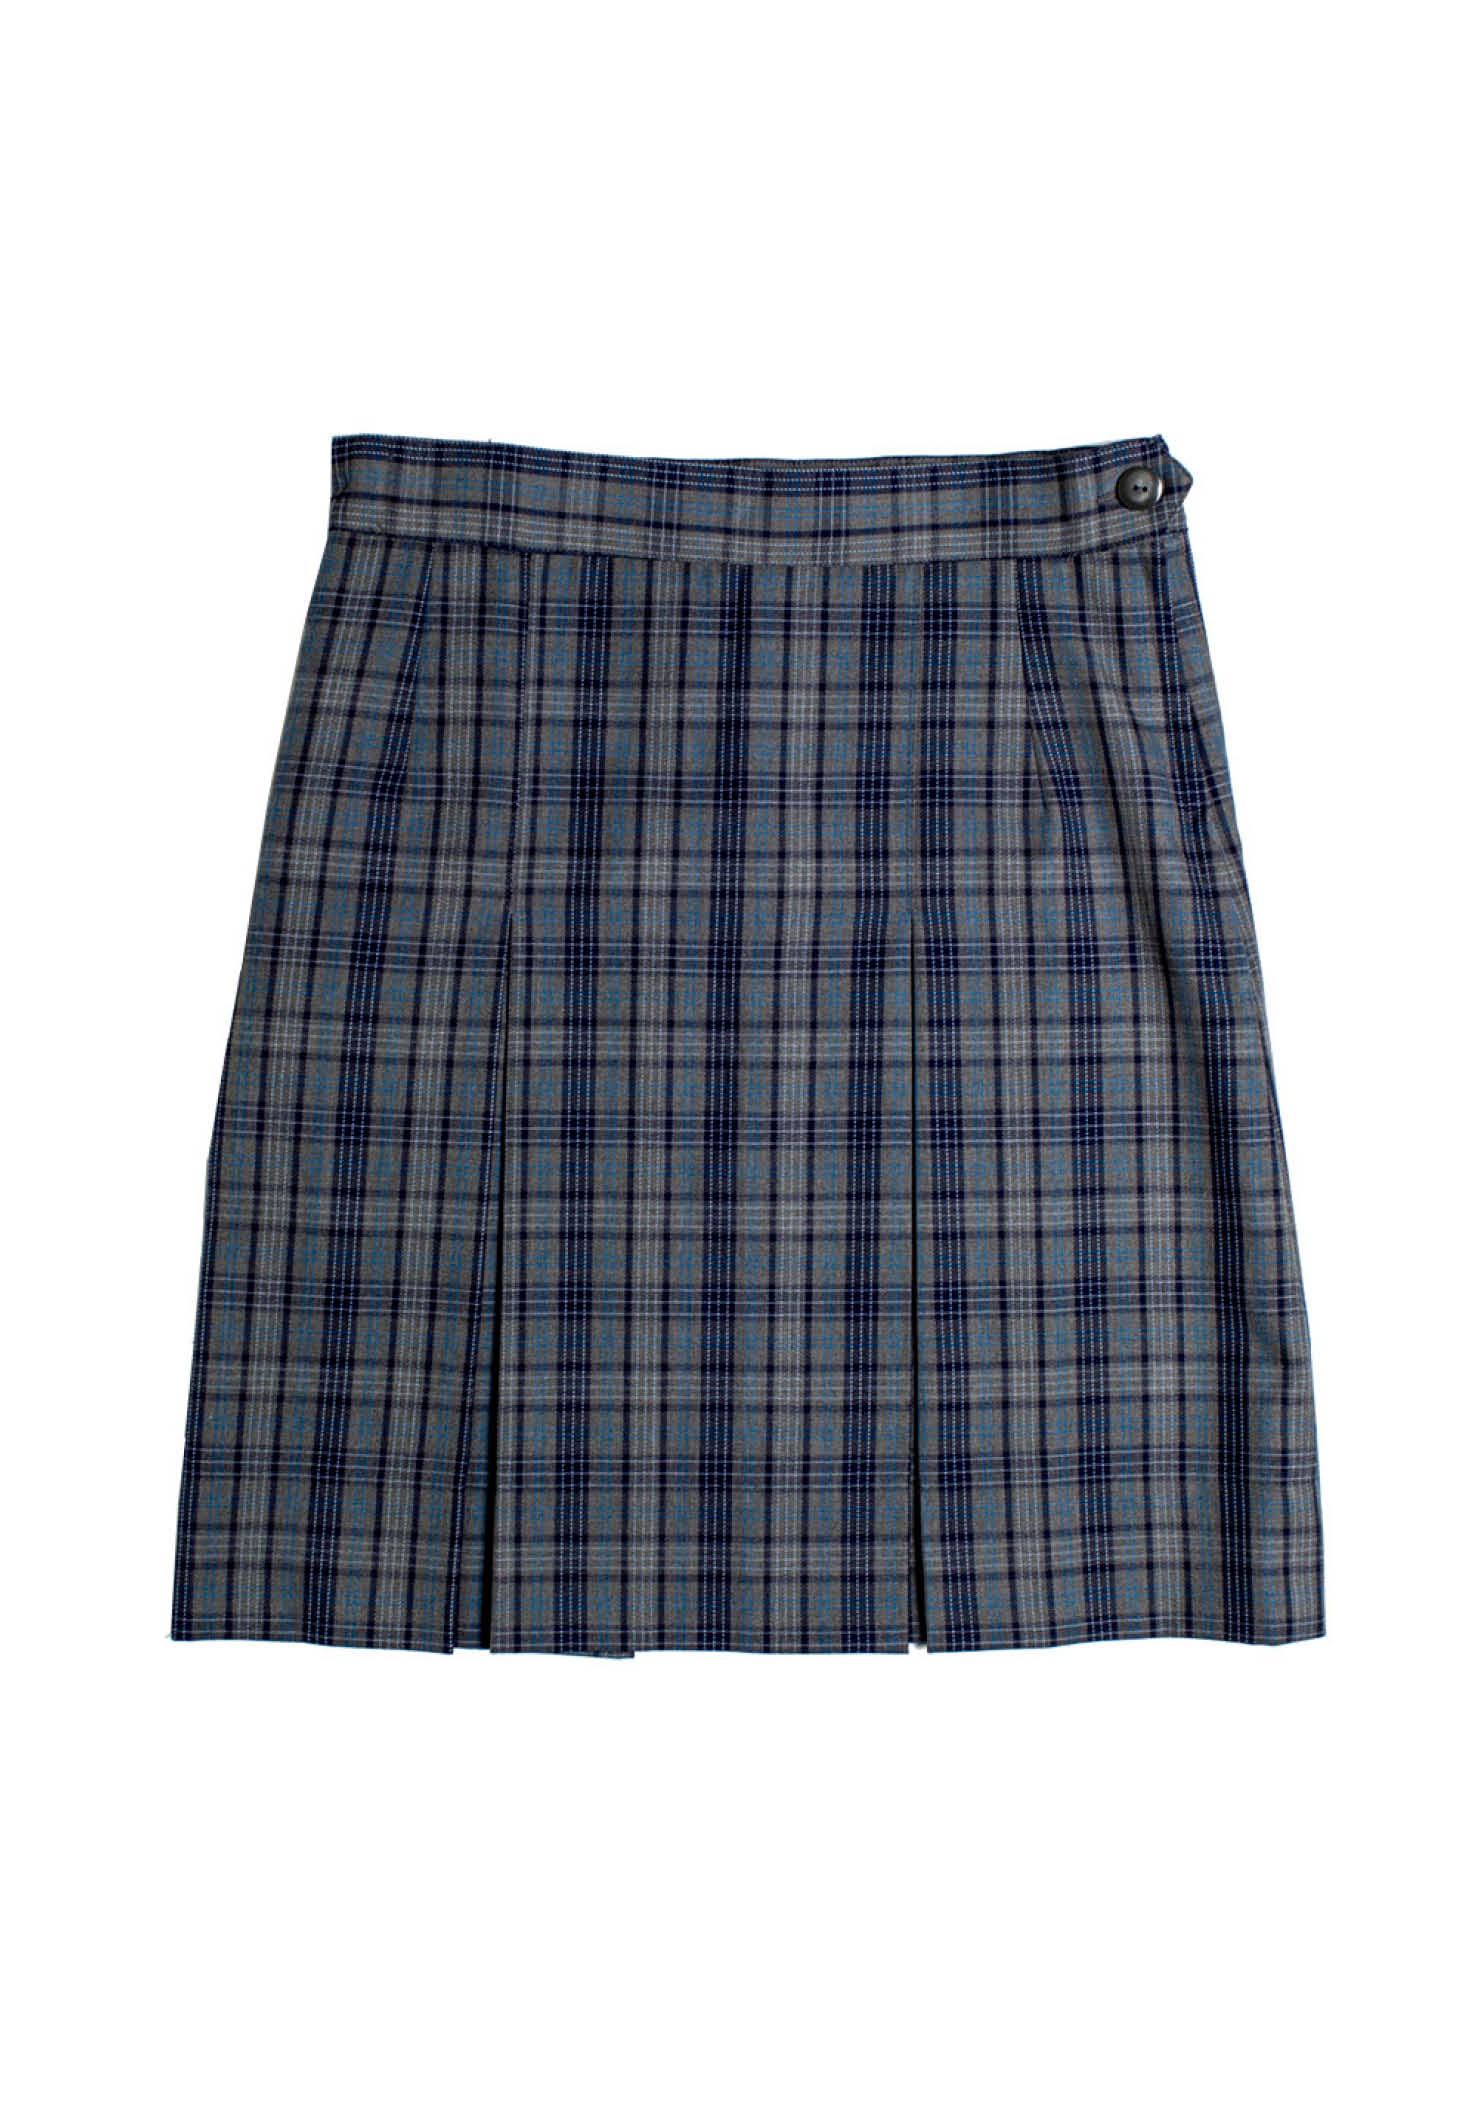 Manly Selective Girls Winter Check Skirt | Shop at Pickles Schoolwear ...